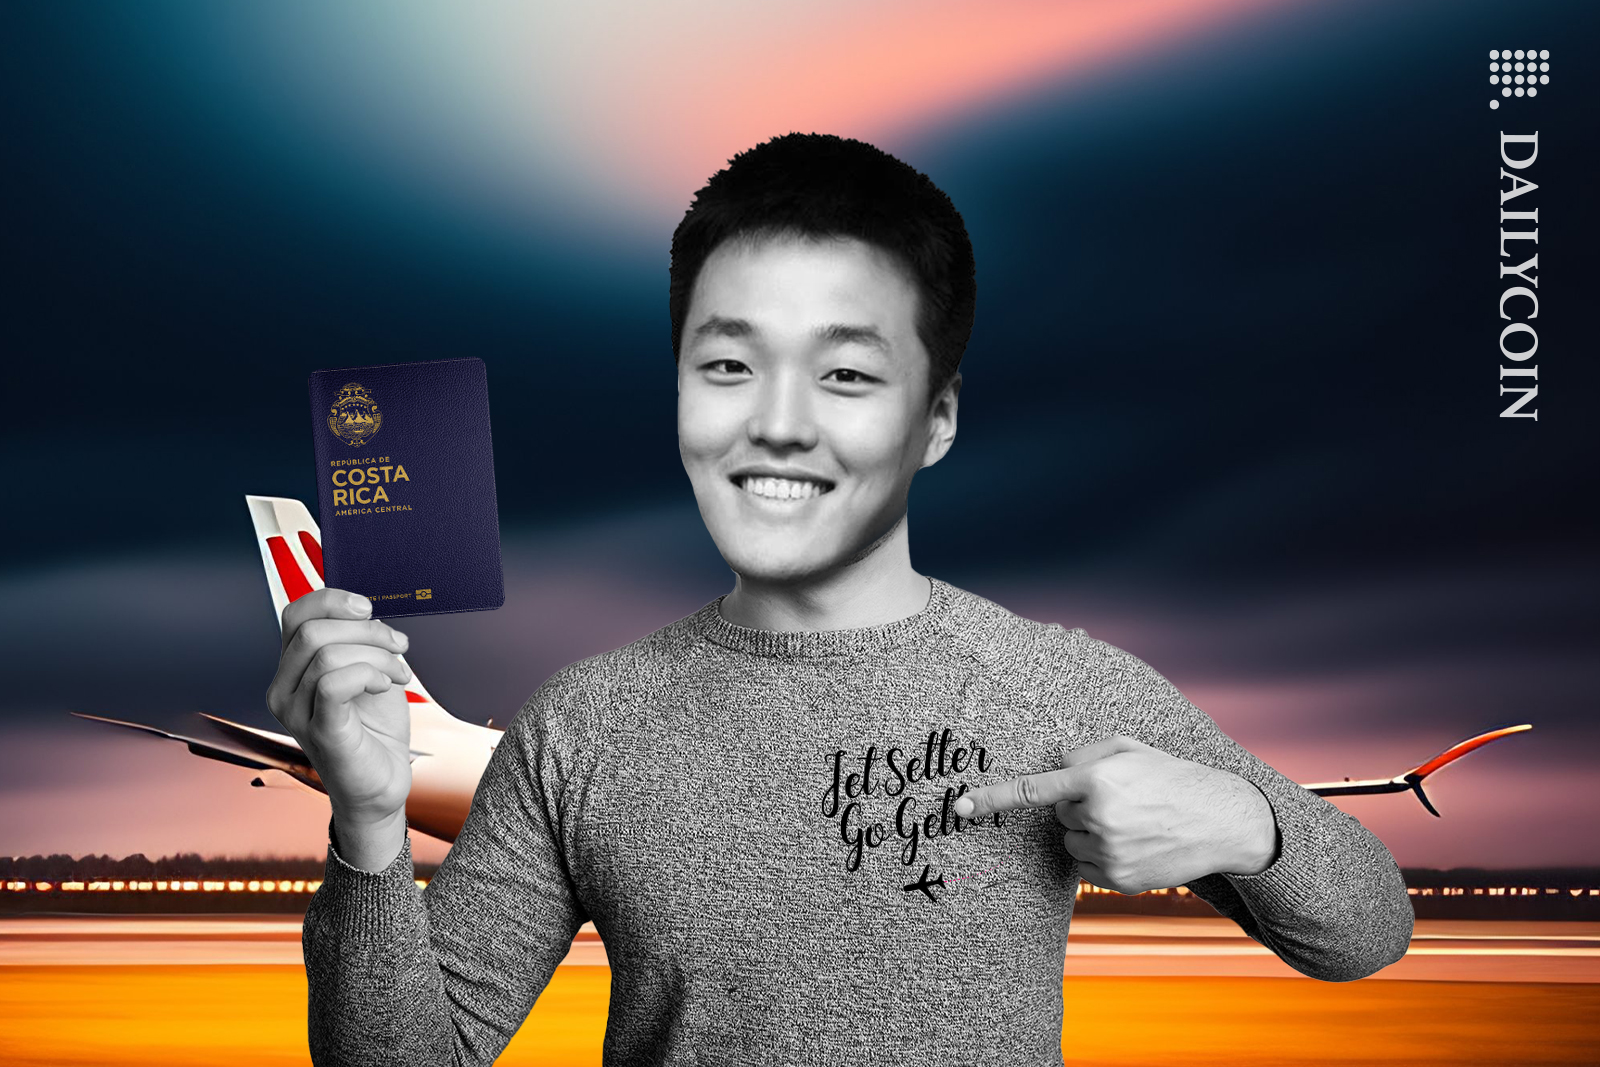 Do Kwon about to go on a plane smilling pointing at his Costa Rican passport.